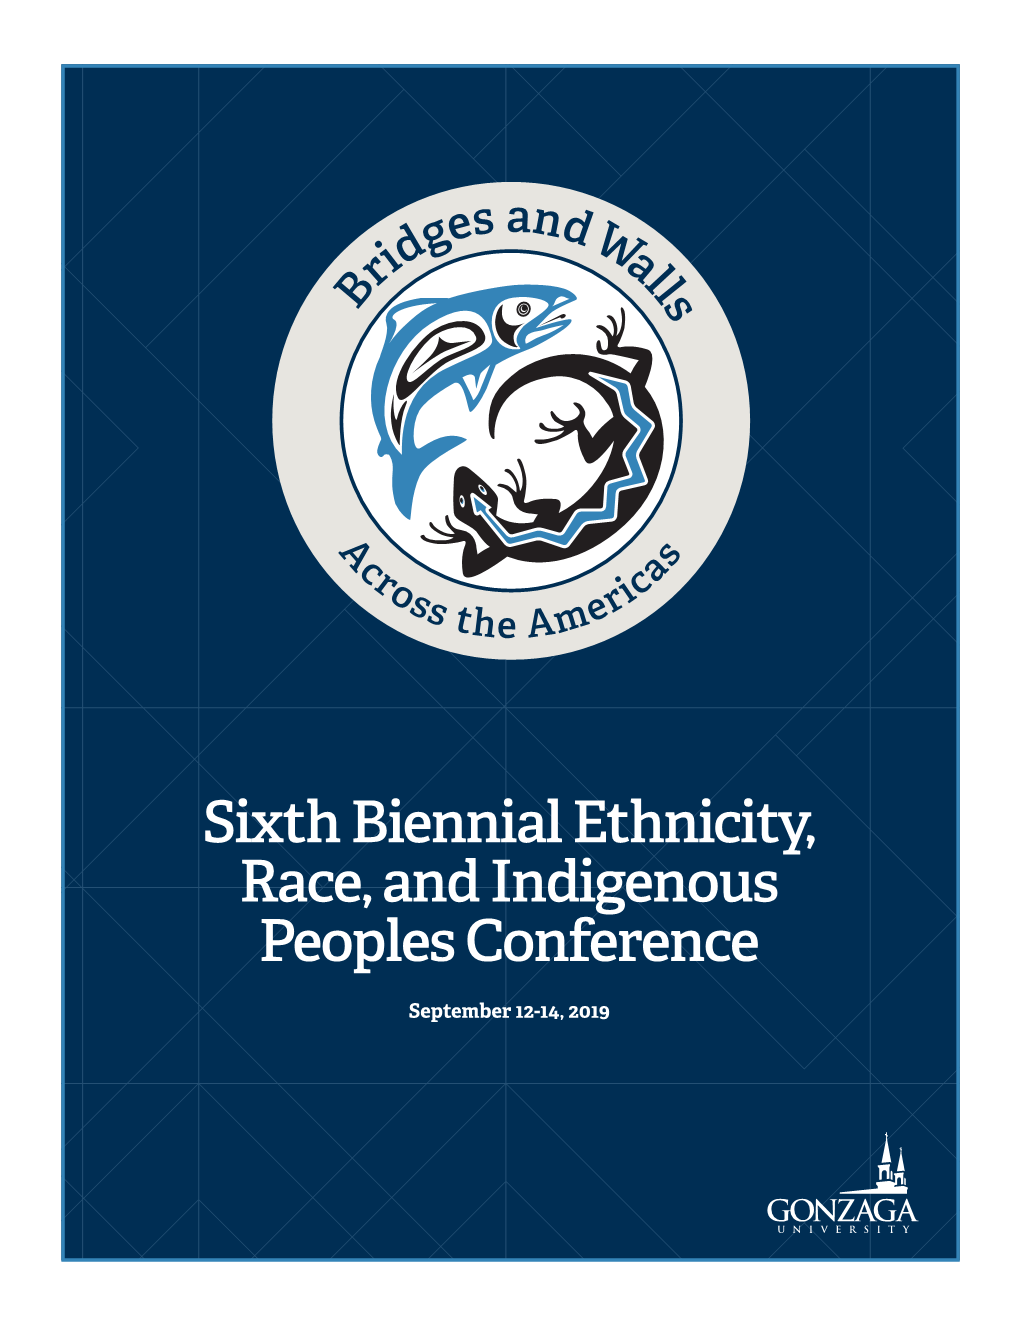 Sixth Biennial Ethnicity, Race, and Indigenous Peoples Conference